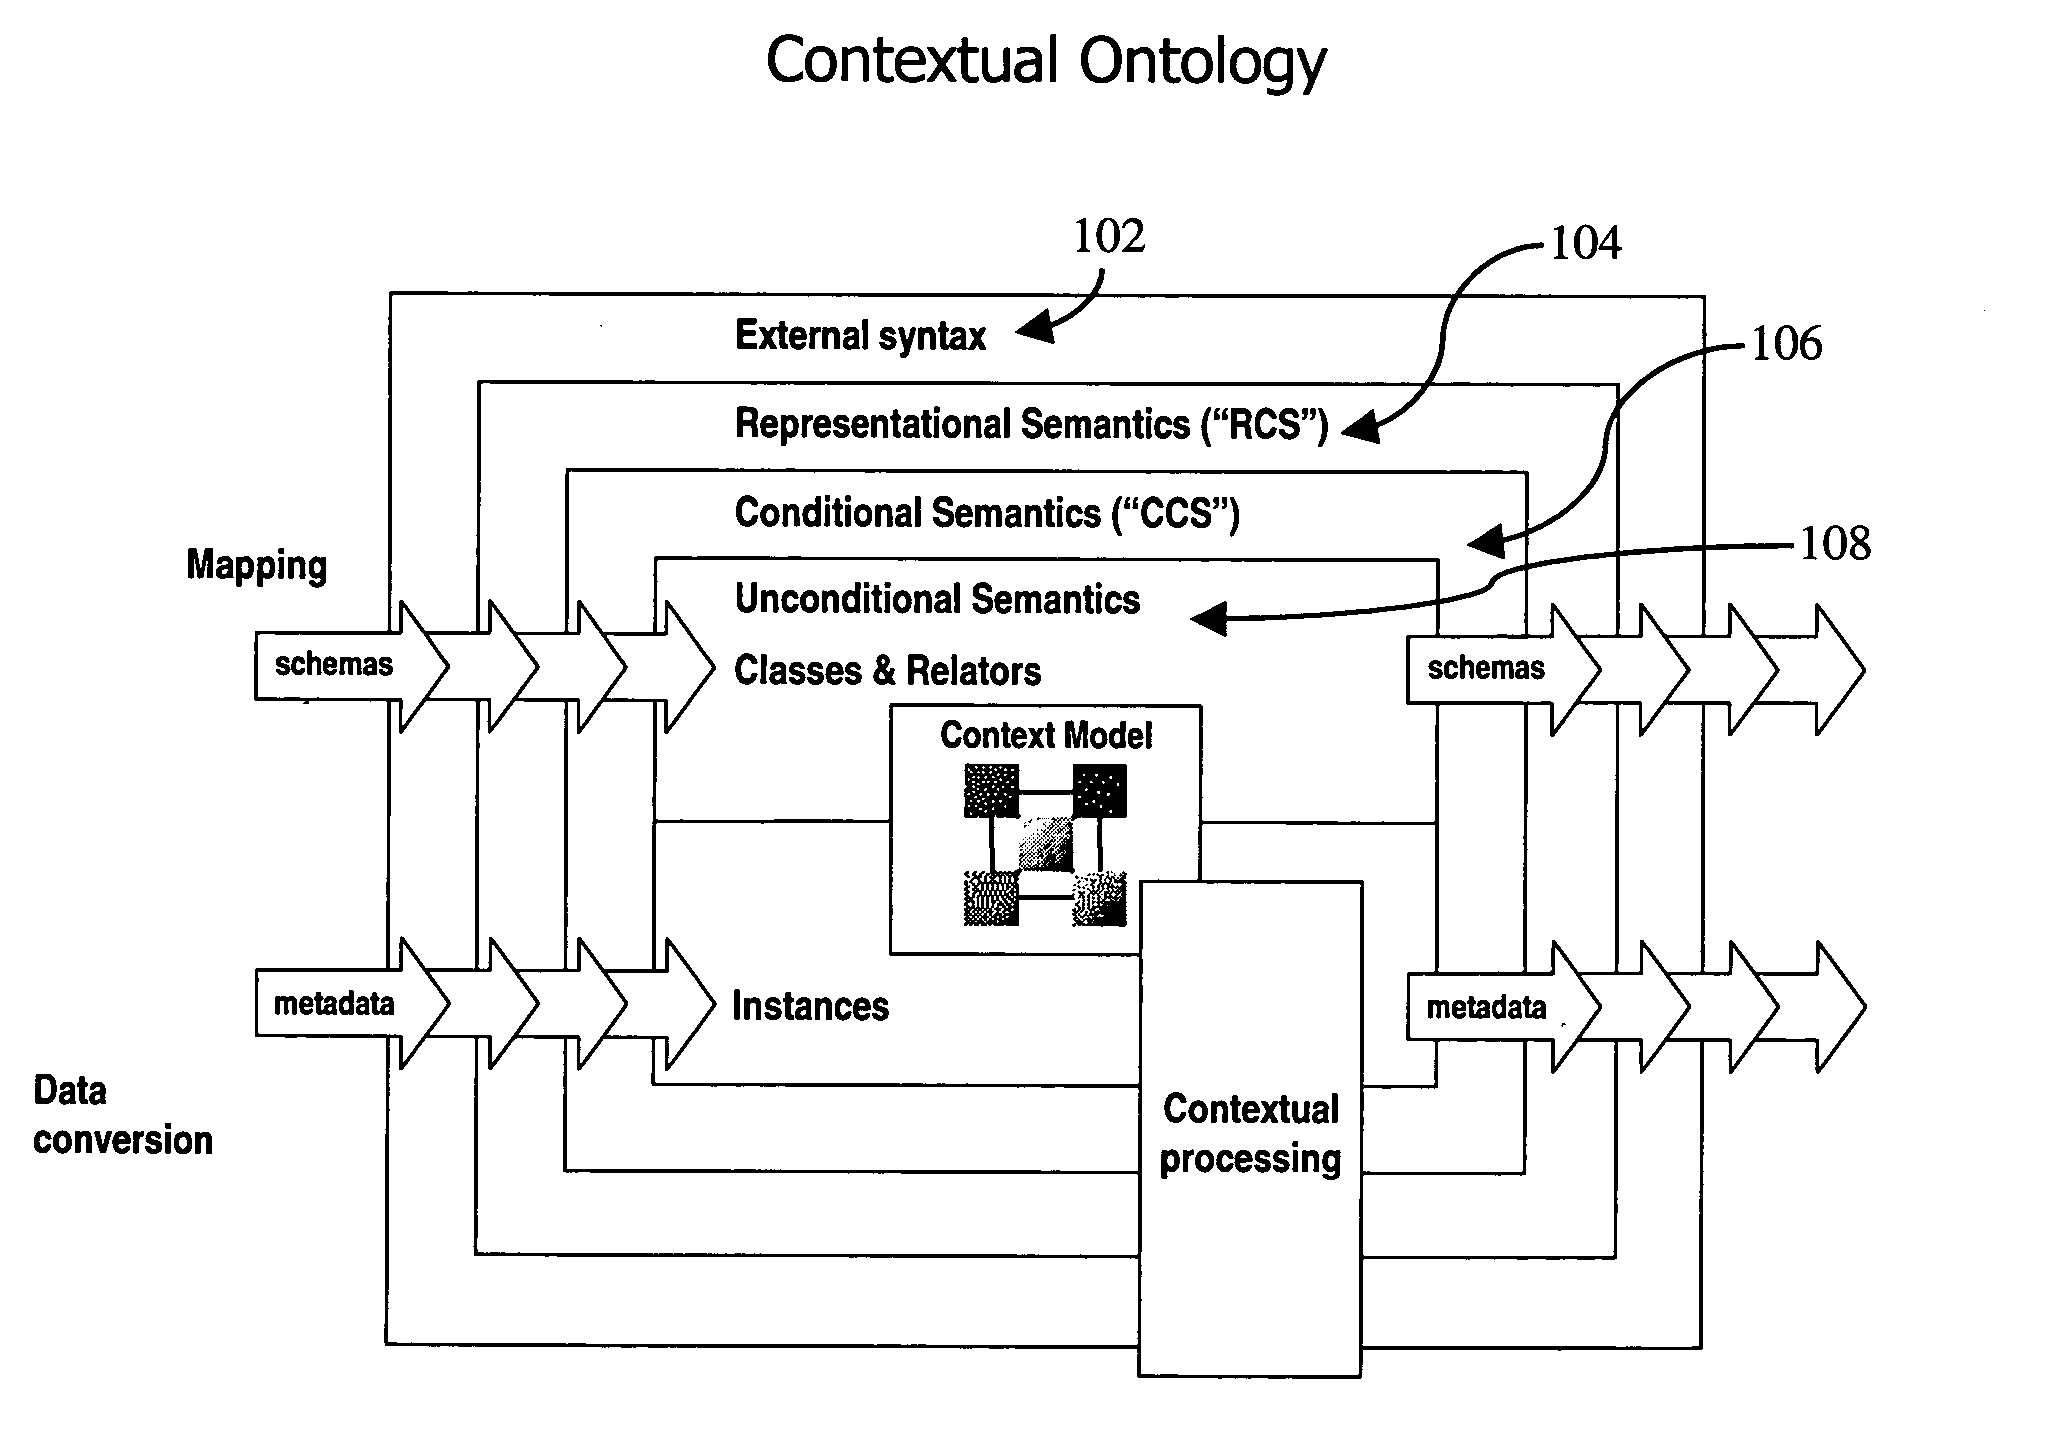 Computer implemented methods and systems for representing multiple data schemas and transferring data between different data schemas within a contextual ontology